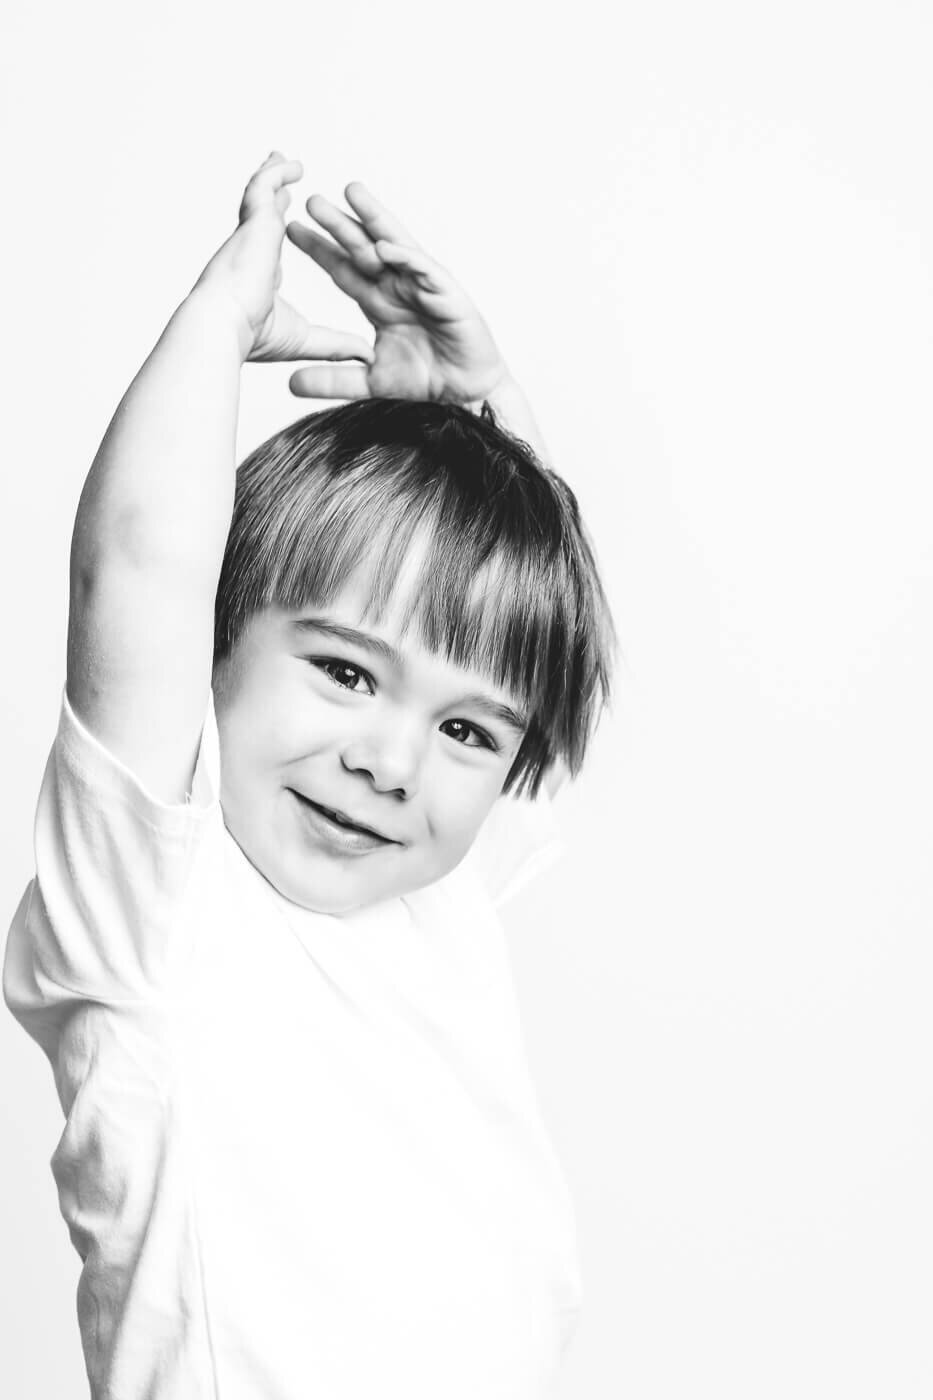 Monochrome of child lifting his hands above his head